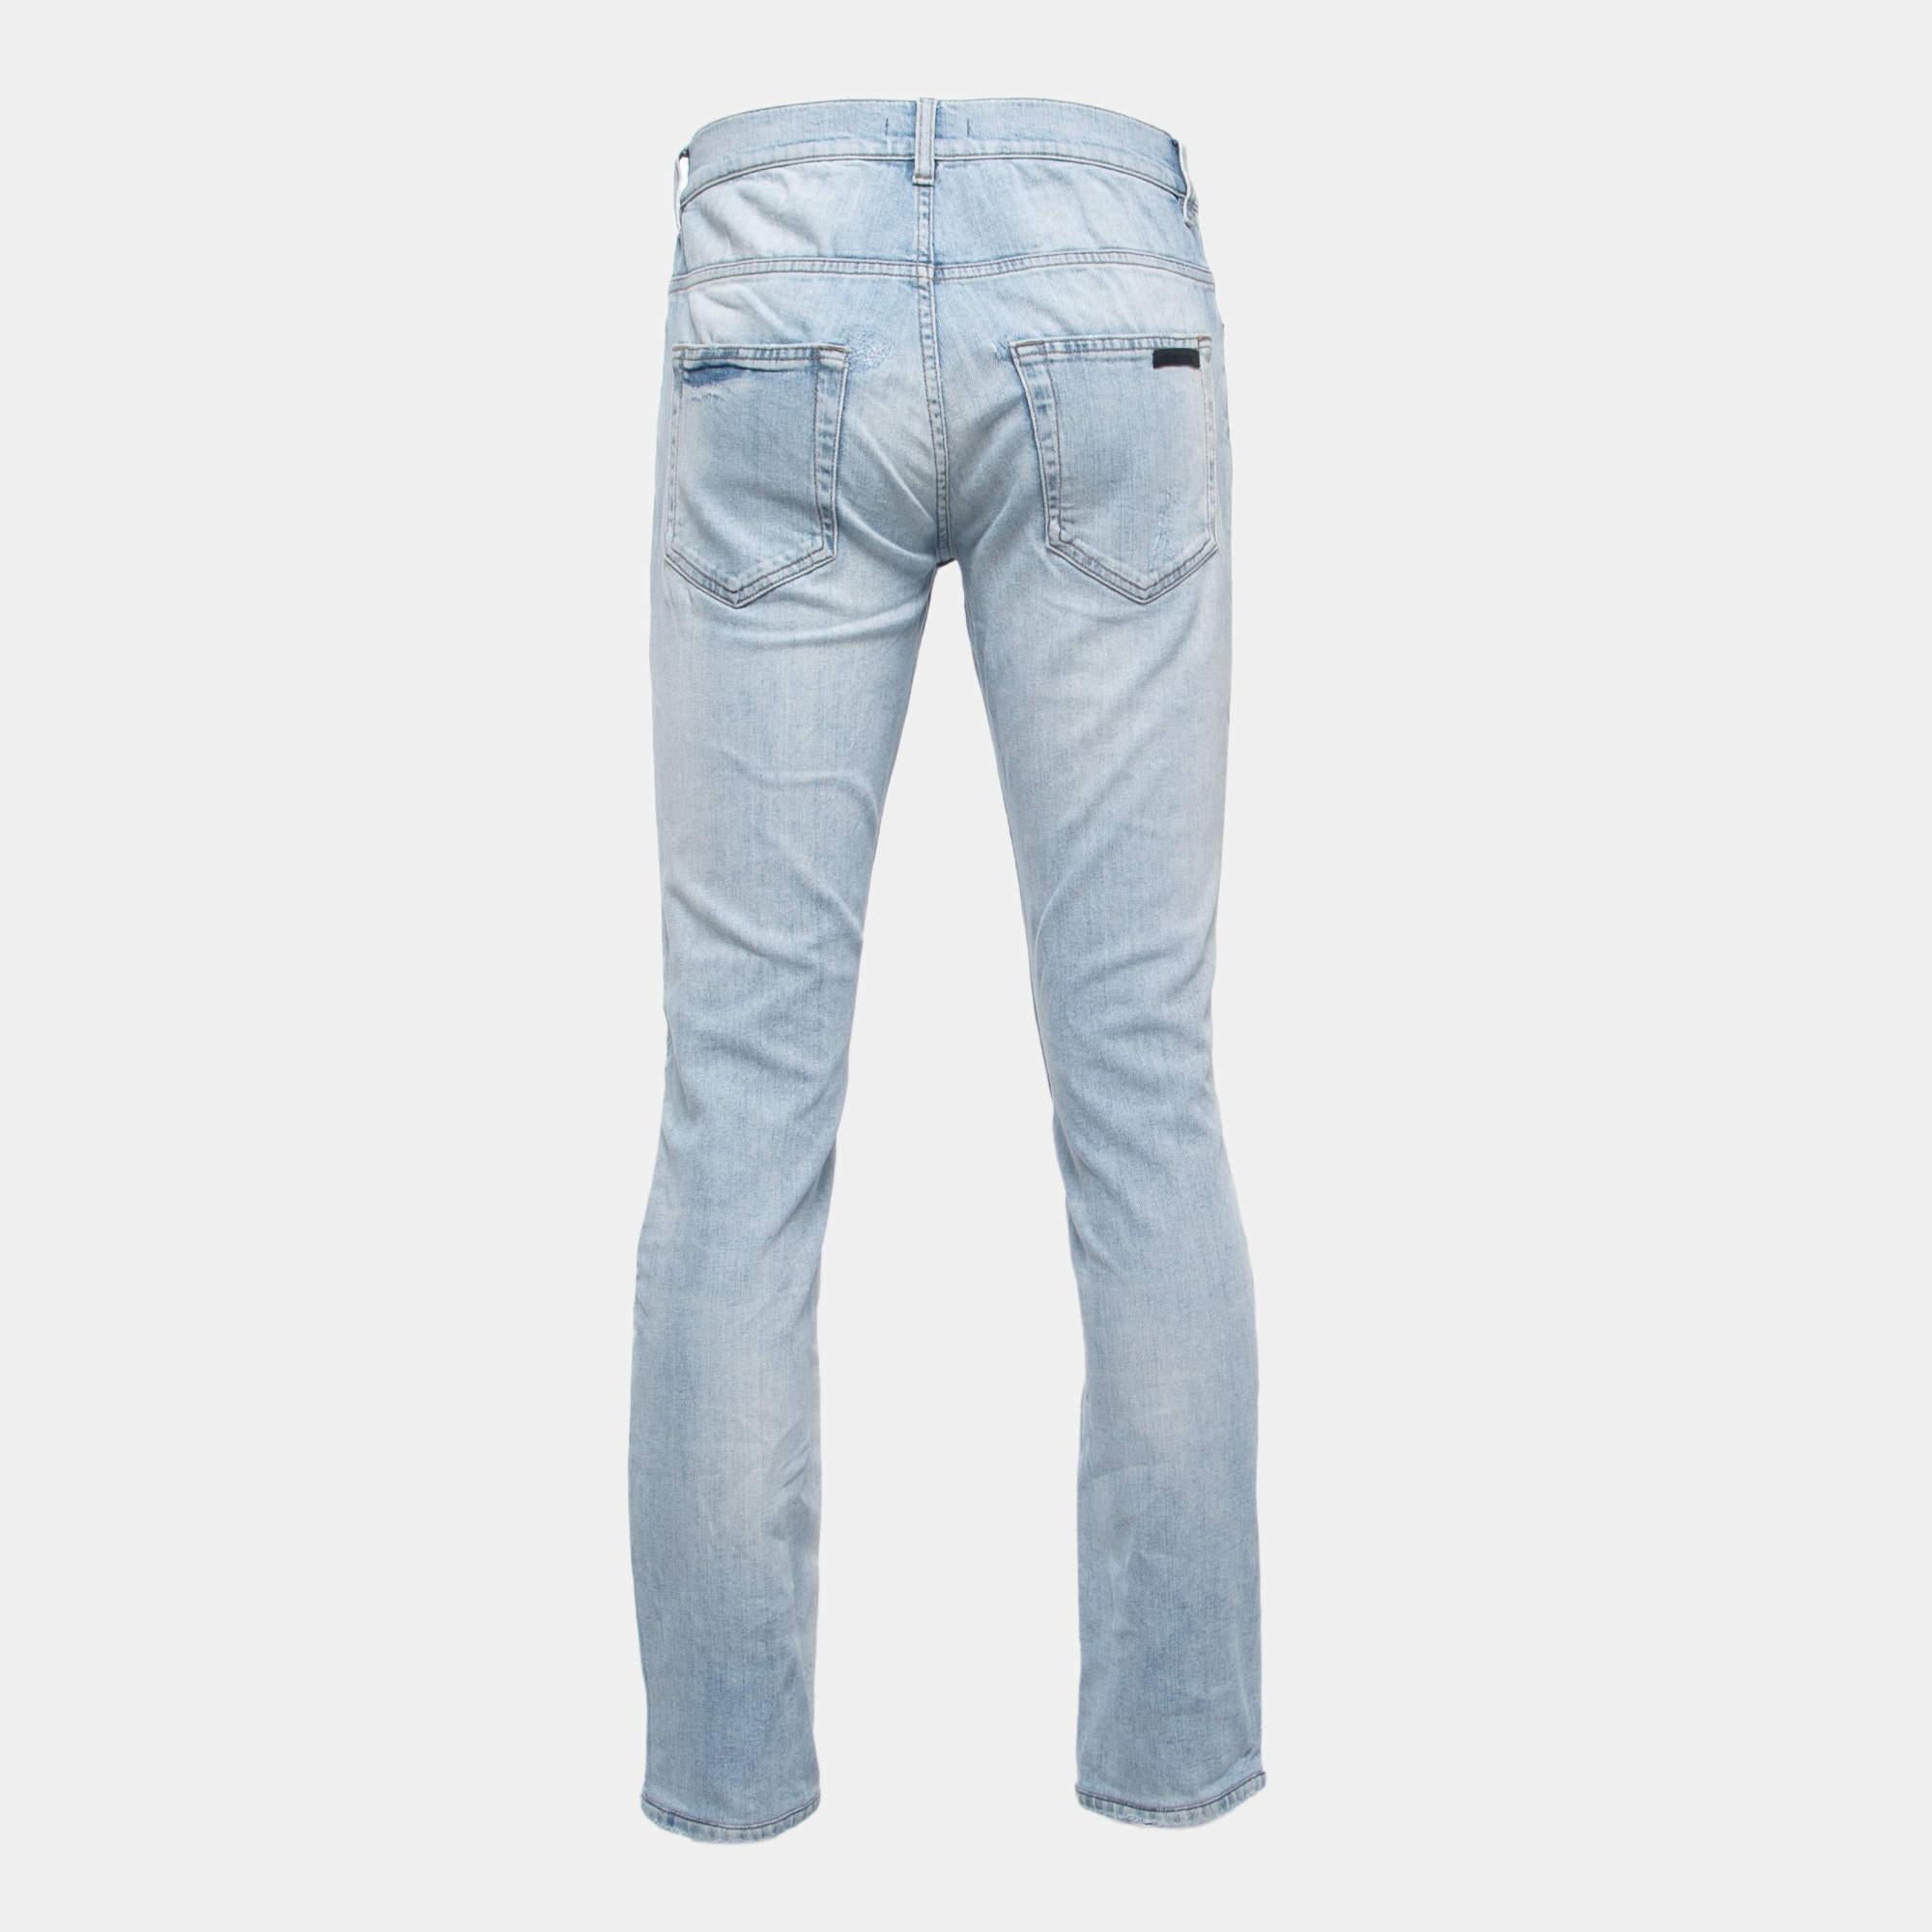 Step into style with these Prada jeans for men. Crafted with precision, they offer the perfect blend of fashion and comfort, making them a must-have for any wardrobe.

